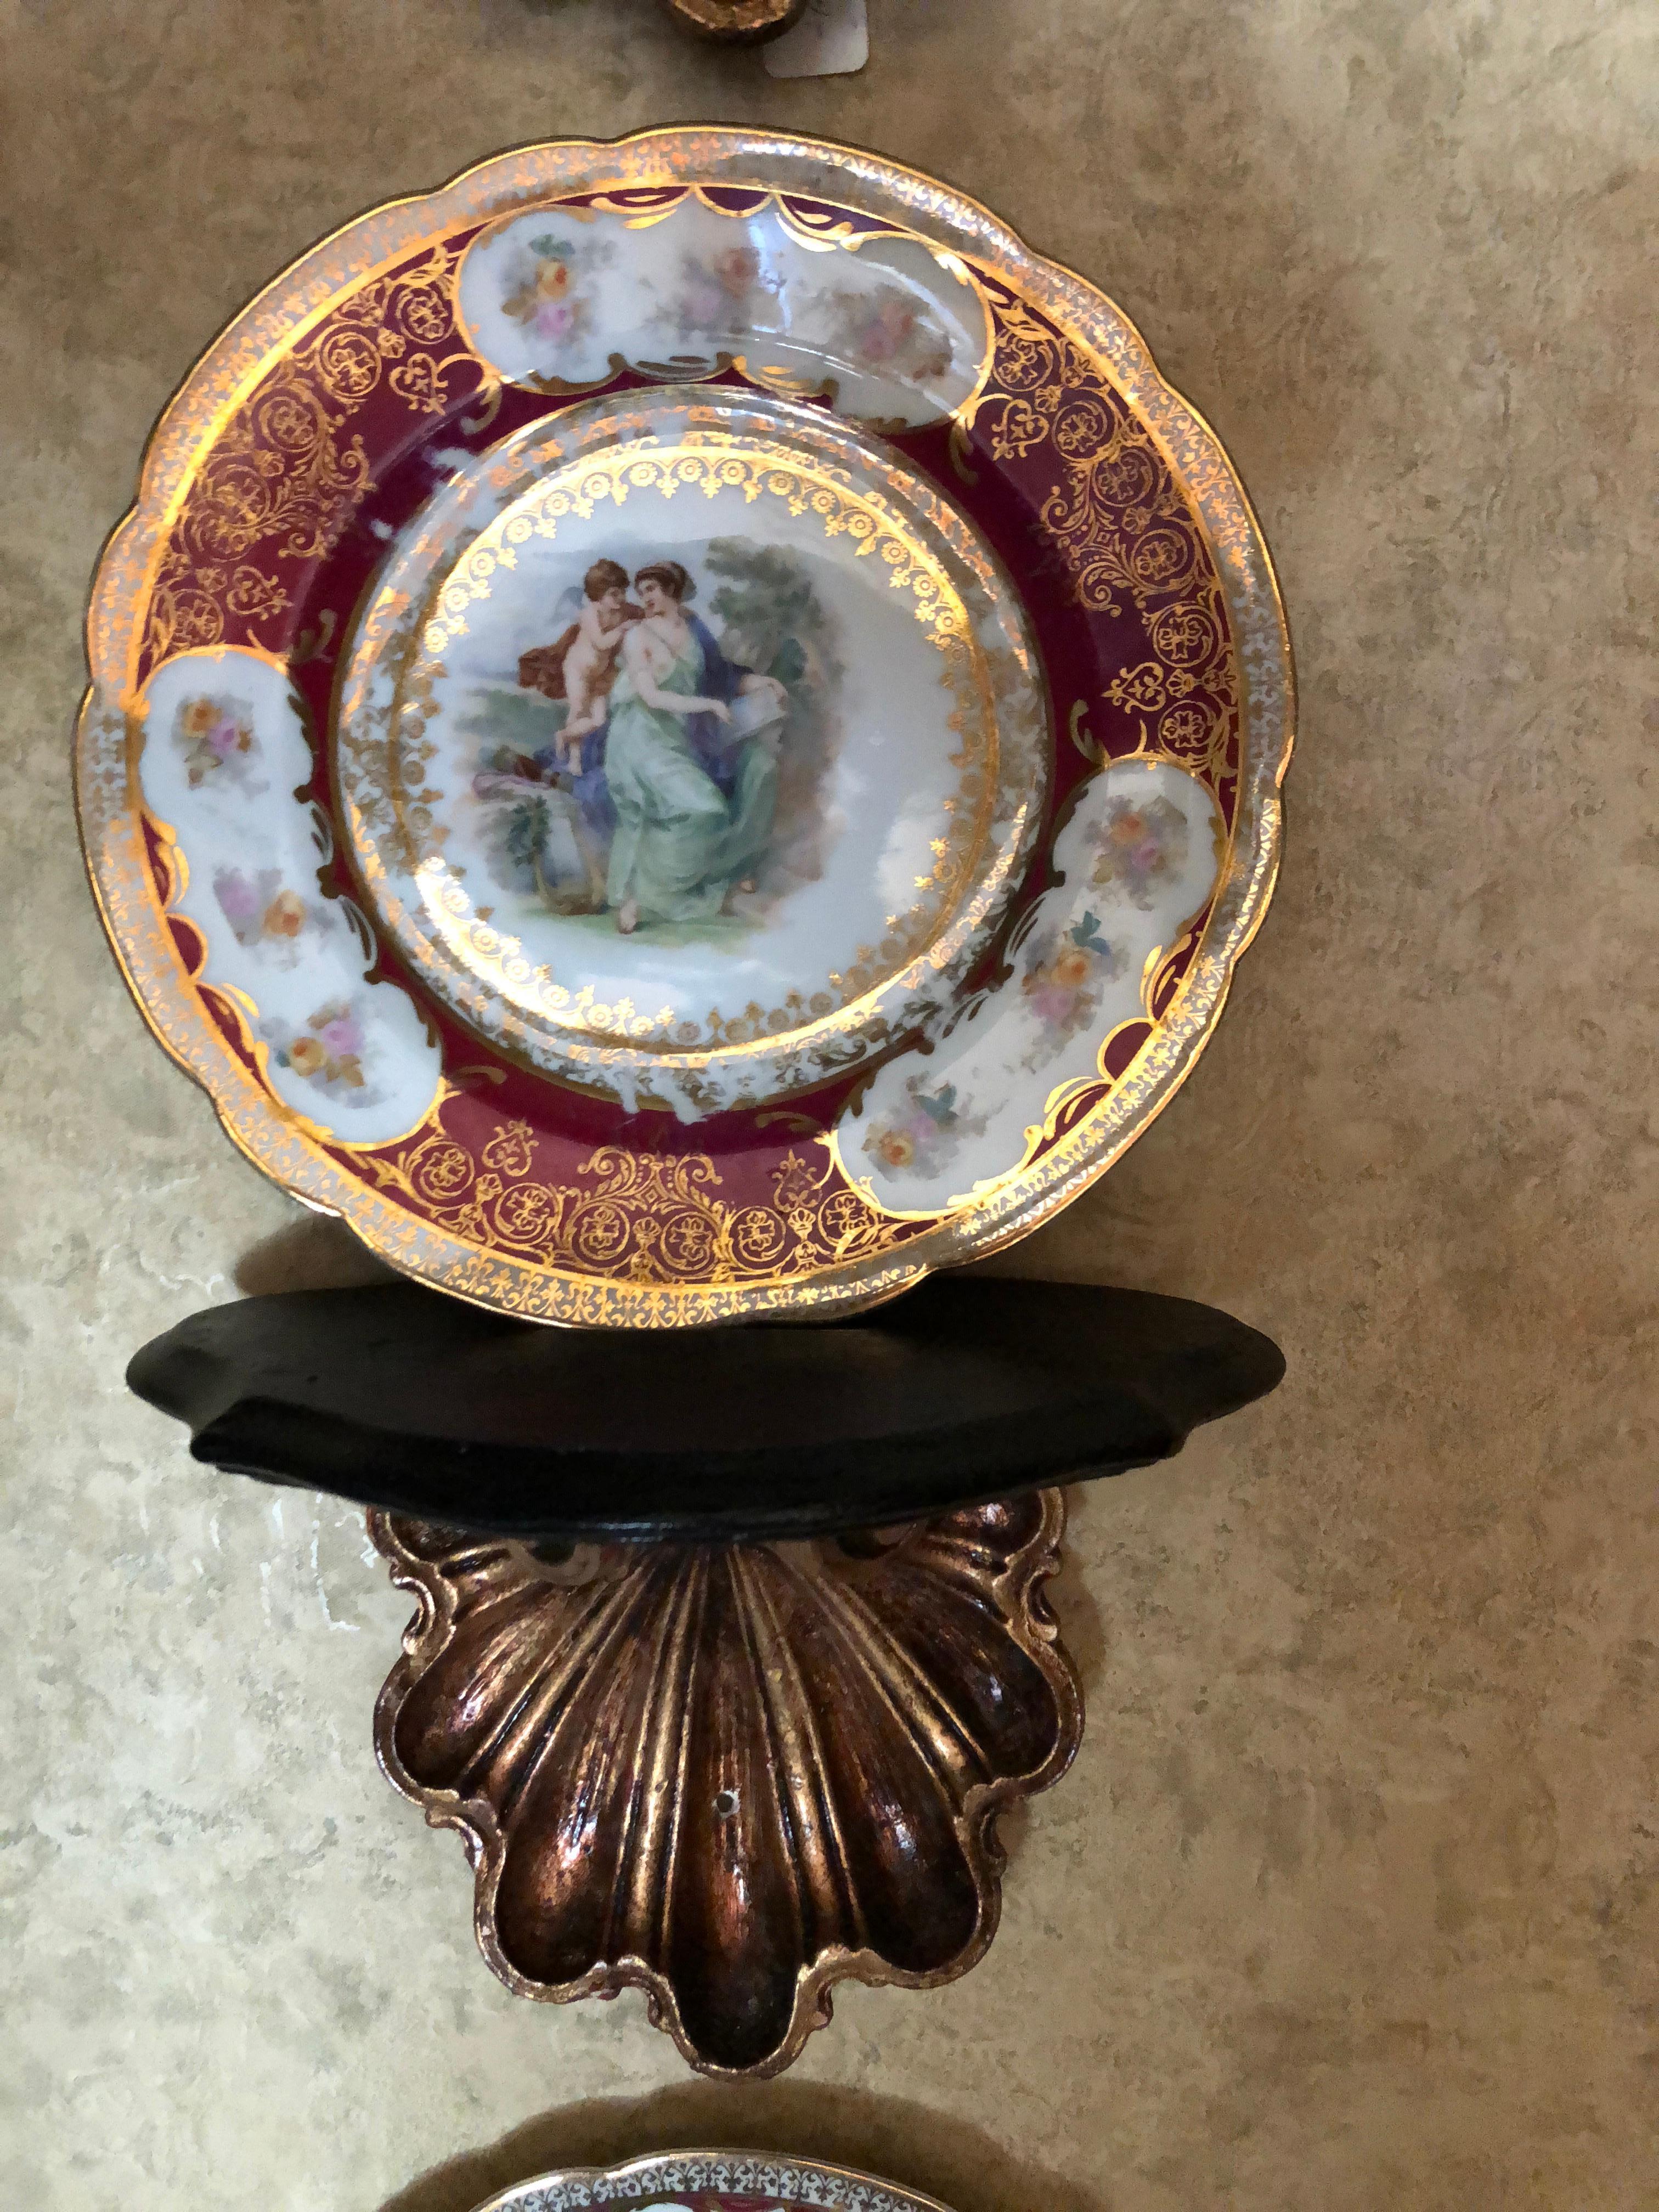 These shell style plate holder/shelves are made of plaster. They are carefully crafted and hand finished in my studio. The shell has gold leaf foil applied over a red base. The gold leaf is then given a brownish stain for an antique appearance. The